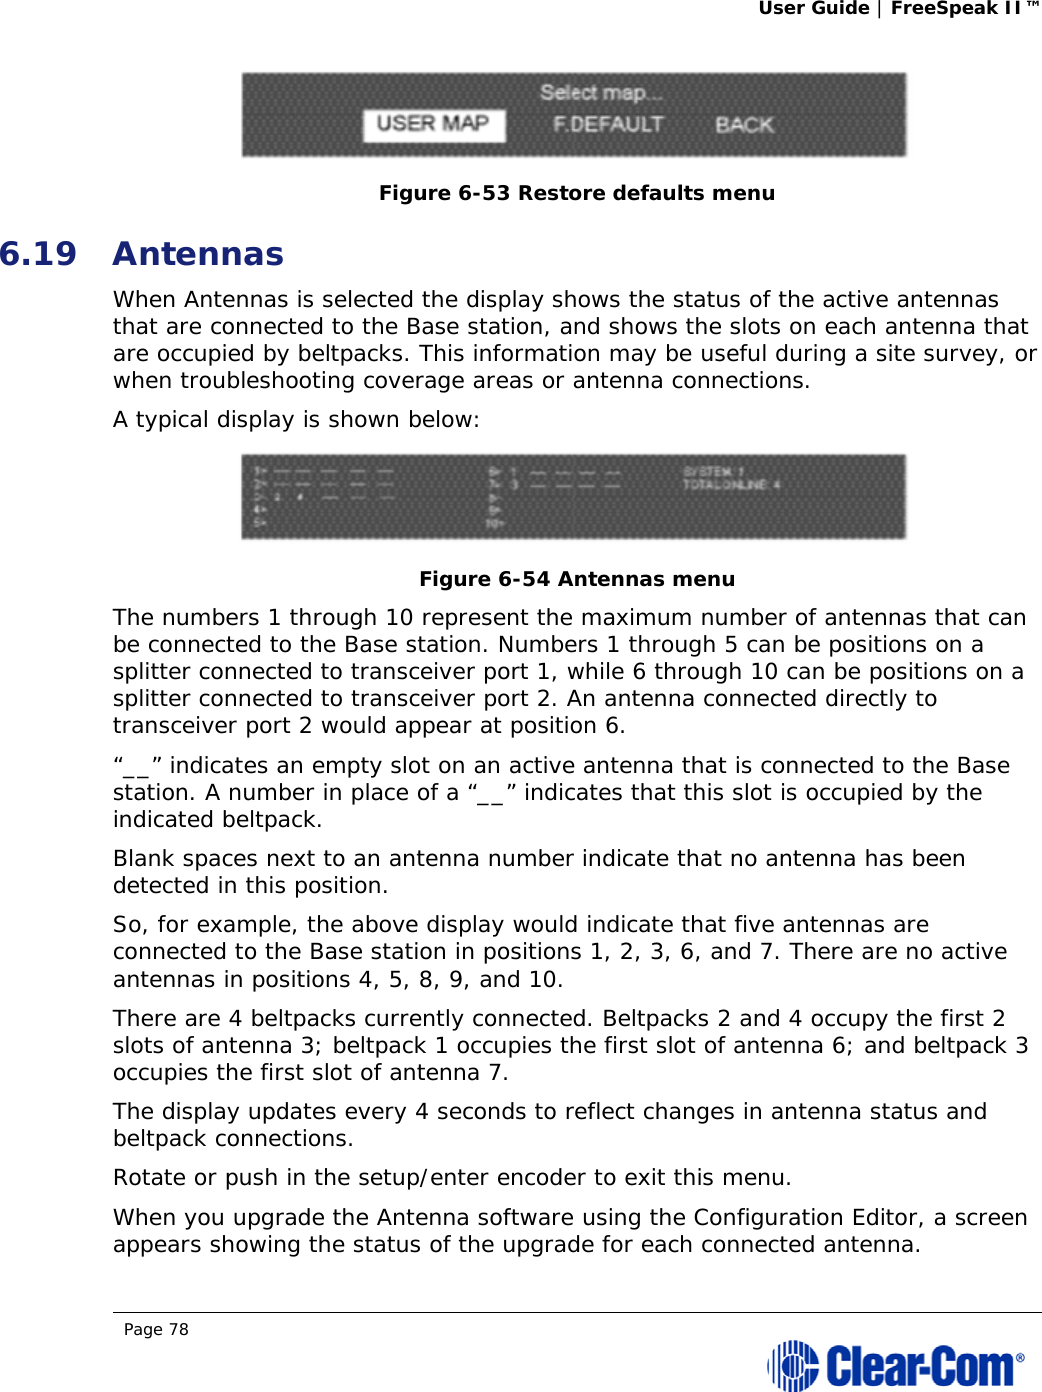 User Guide | FreeSpeak II™  Page 78   Figure 6-53 Restore defaults menu 6.19 Antennas When Antennas is selected the display shows the status of the active antennas that are connected to the Base station, and shows the slots on each antenna that are occupied by beltpacks. This information may be useful during a site survey, or when troubleshooting coverage areas or antenna connections.  A typical display is shown below:  Figure 6-54 Antennas menu  The numbers 1 through 10 represent the maximum number of antennas that can be connected to the Base station. Numbers 1 through 5 can be positions on a splitter connected to transceiver port 1, while 6 through 10 can be positions on a splitter connected to transceiver port 2. An antenna connected directly to transceiver port 2 would appear at position 6.  “__” indicates an empty slot on an active antenna that is connected to the Base station. A number in place of a “__” indicates that this slot is occupied by the indicated beltpack.  Blank spaces next to an antenna number indicate that no antenna has been detected in this position.  So, for example, the above display would indicate that five antennas are connected to the Base station in positions 1, 2, 3, 6, and 7. There are no active antennas in positions 4, 5, 8, 9, and 10.  There are 4 beltpacks currently connected. Beltpacks 2 and 4 occupy the first 2 slots of antenna 3; beltpack 1 occupies the first slot of antenna 6; and beltpack 3 occupies the first slot of antenna 7.  The display updates every 4 seconds to reflect changes in antenna status and beltpack connections.  Rotate or push in the setup/enter encoder to exit this menu. When you upgrade the Antenna software using the Configuration Editor, a screen appears showing the status of the upgrade for each connected antenna.  